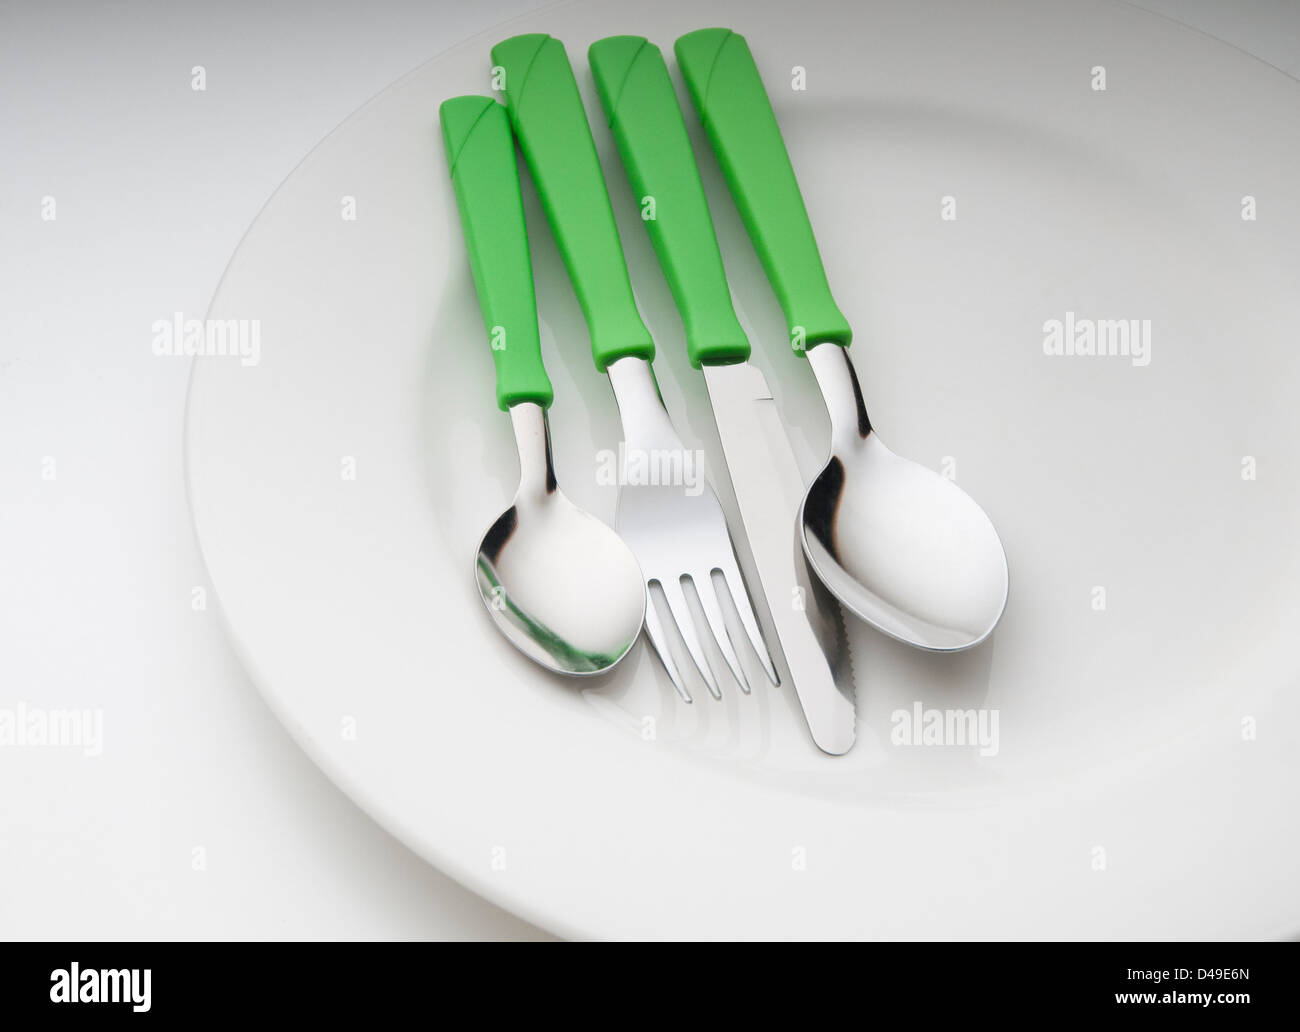 metal cutlery and plate in color on table Stock Photo